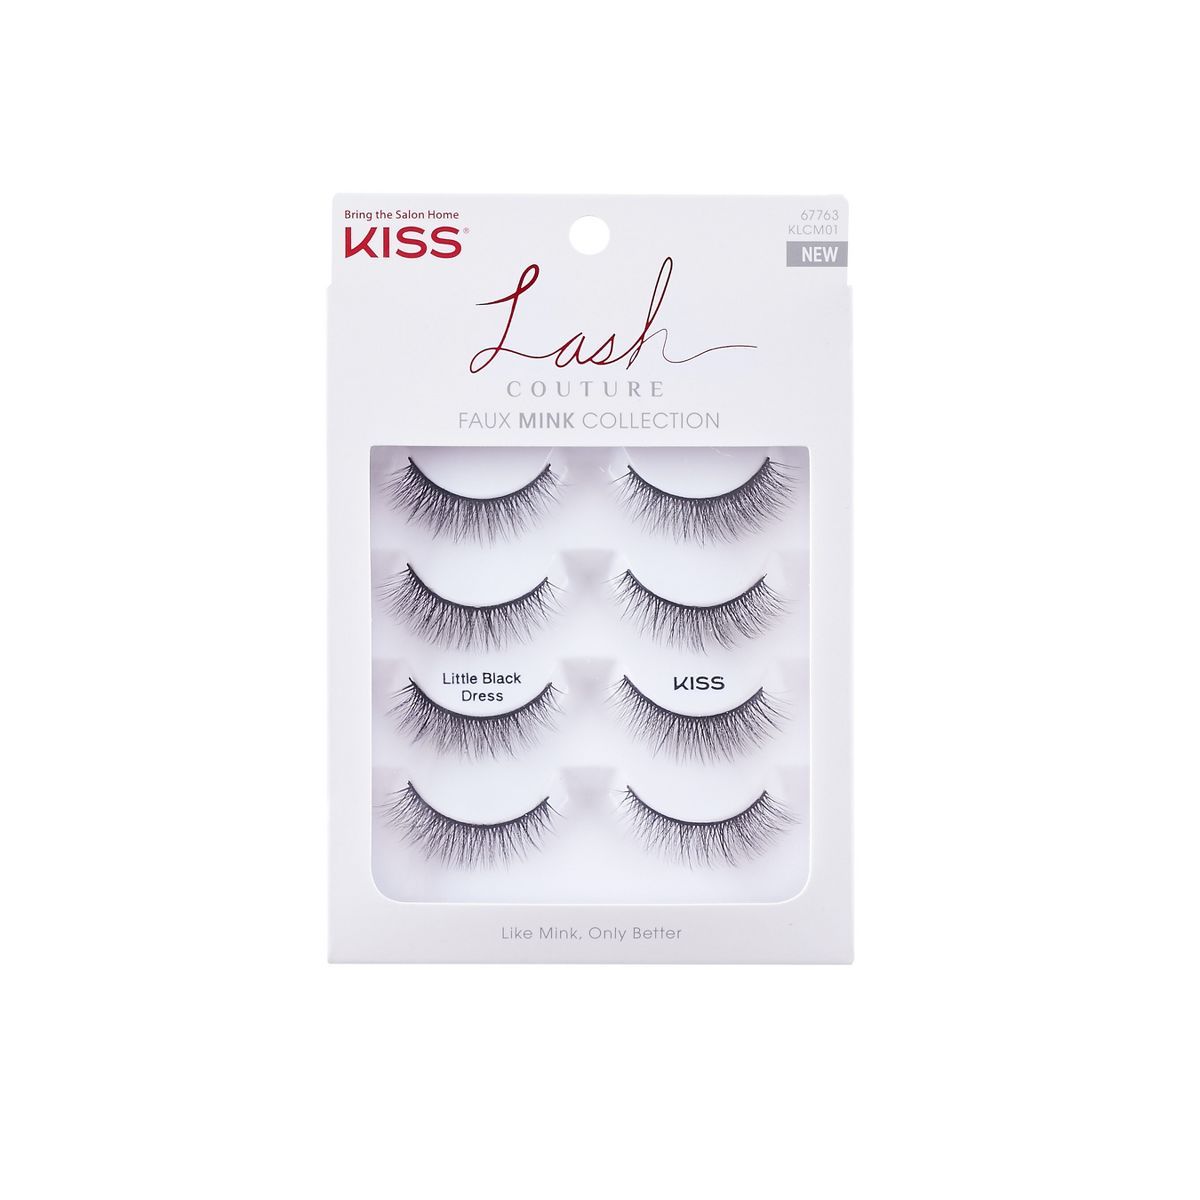 KISS Lash Couture Faux Mink Collection Fake Eyelashes - Little Black Dress - 4 Pairs | Target